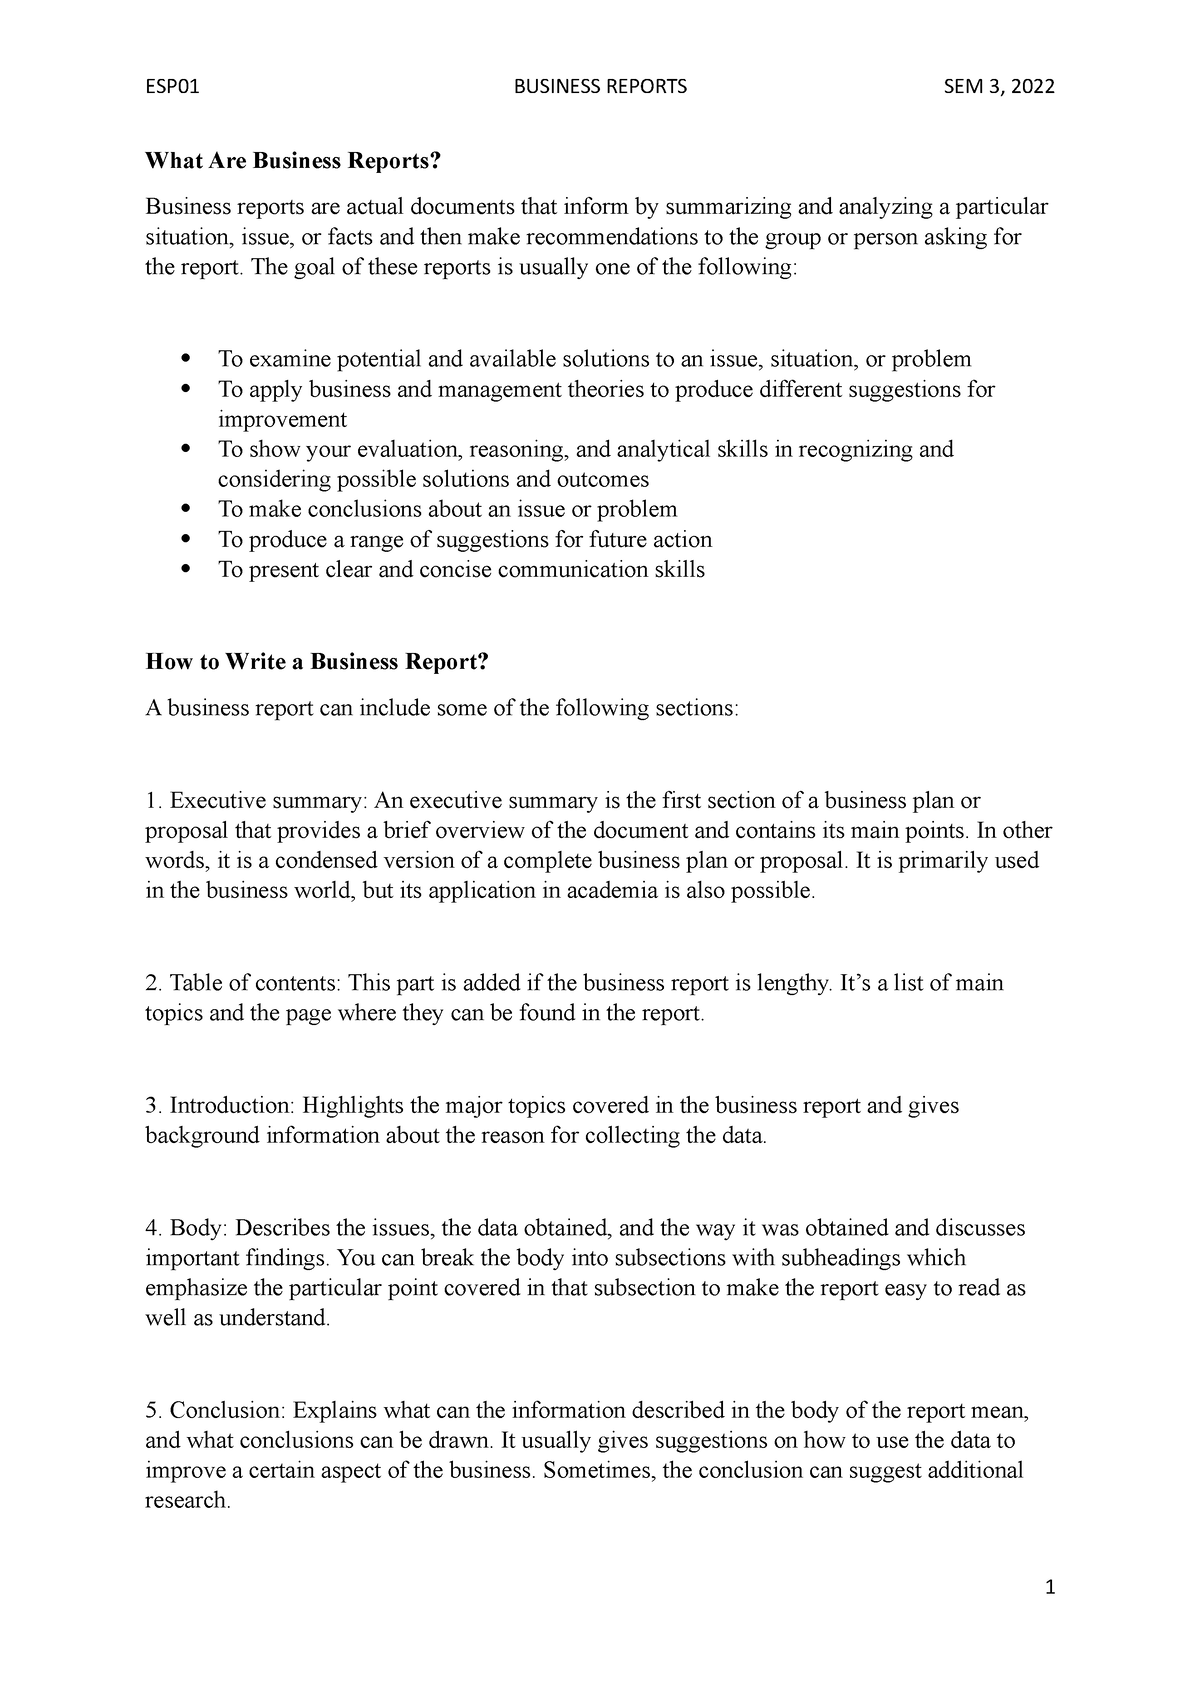 how to write a business report conclusion